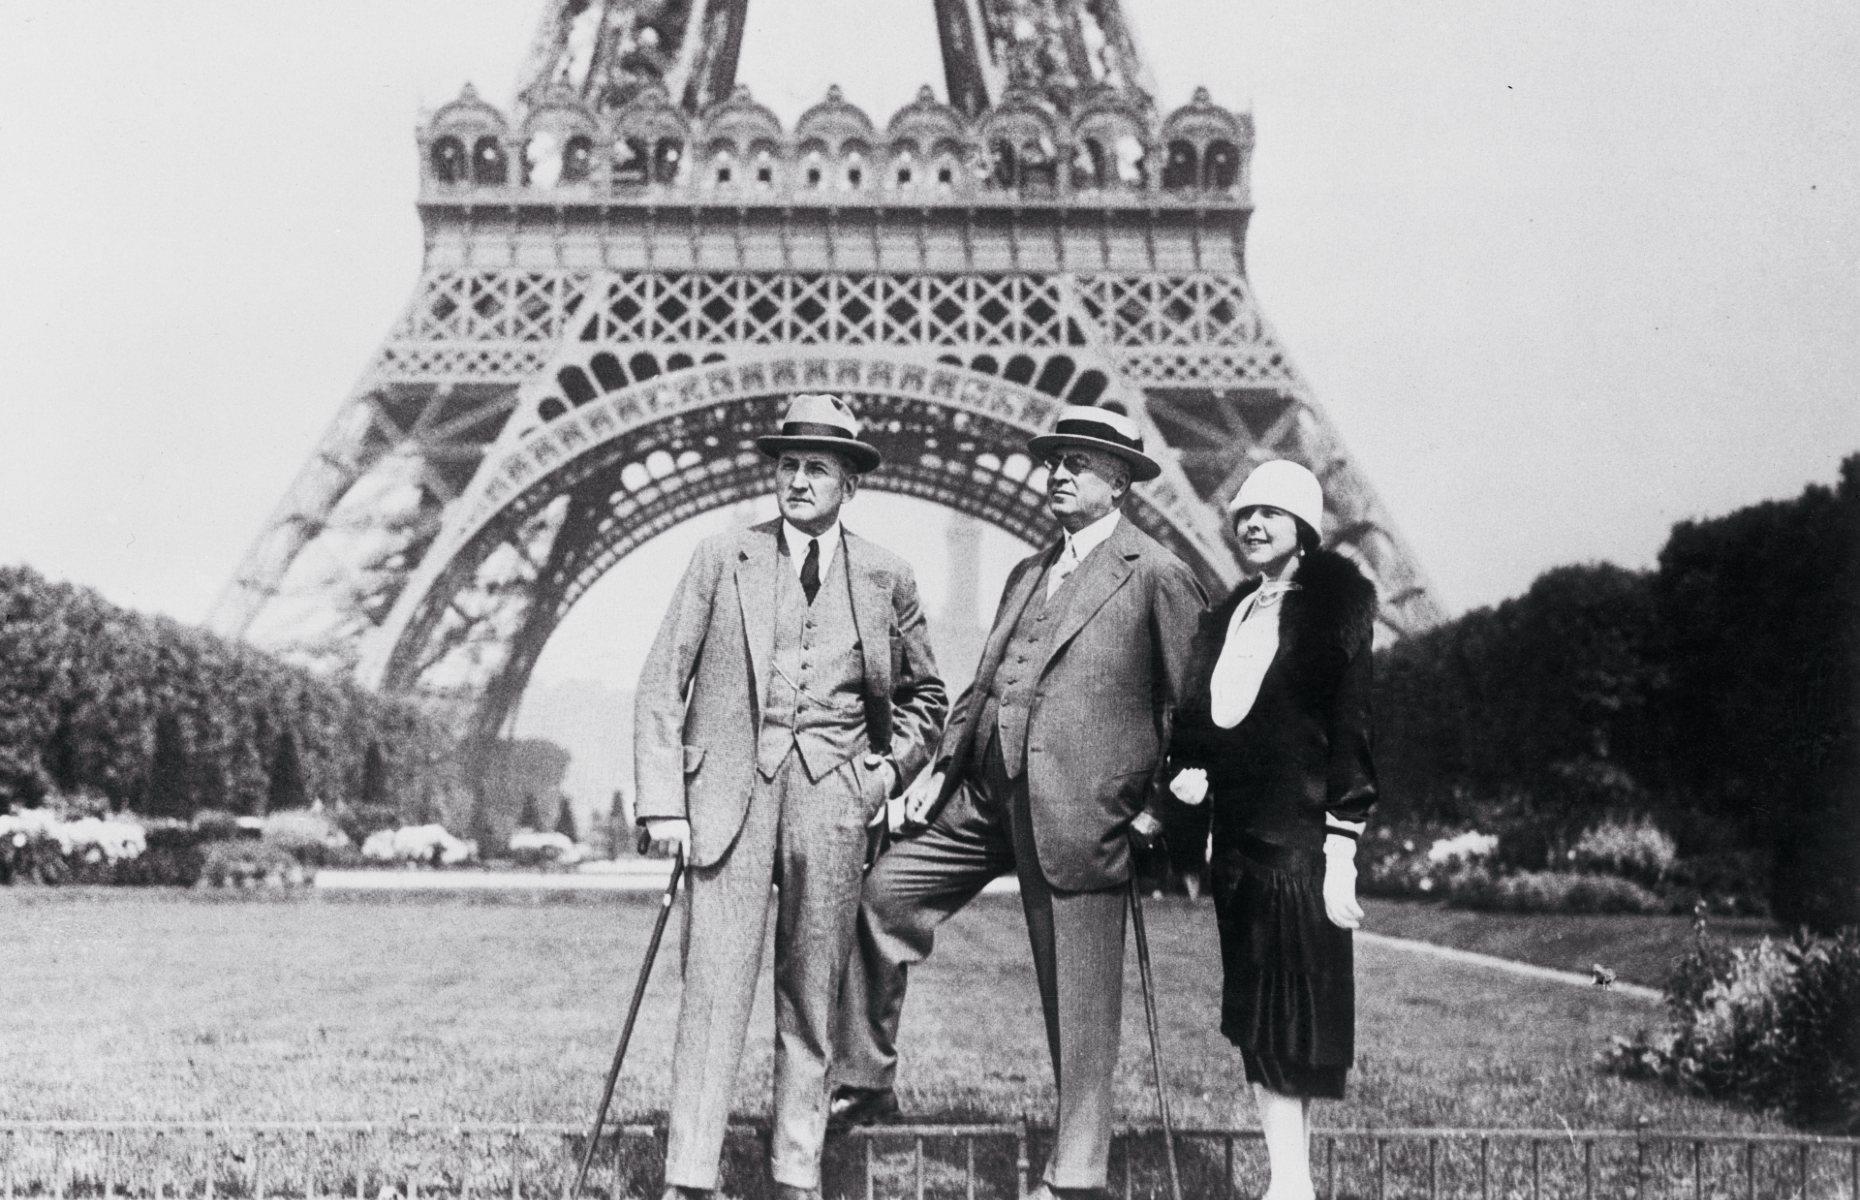 Vintage Photos Reveal How Famous Landmarks Have Changed Over 100 Years